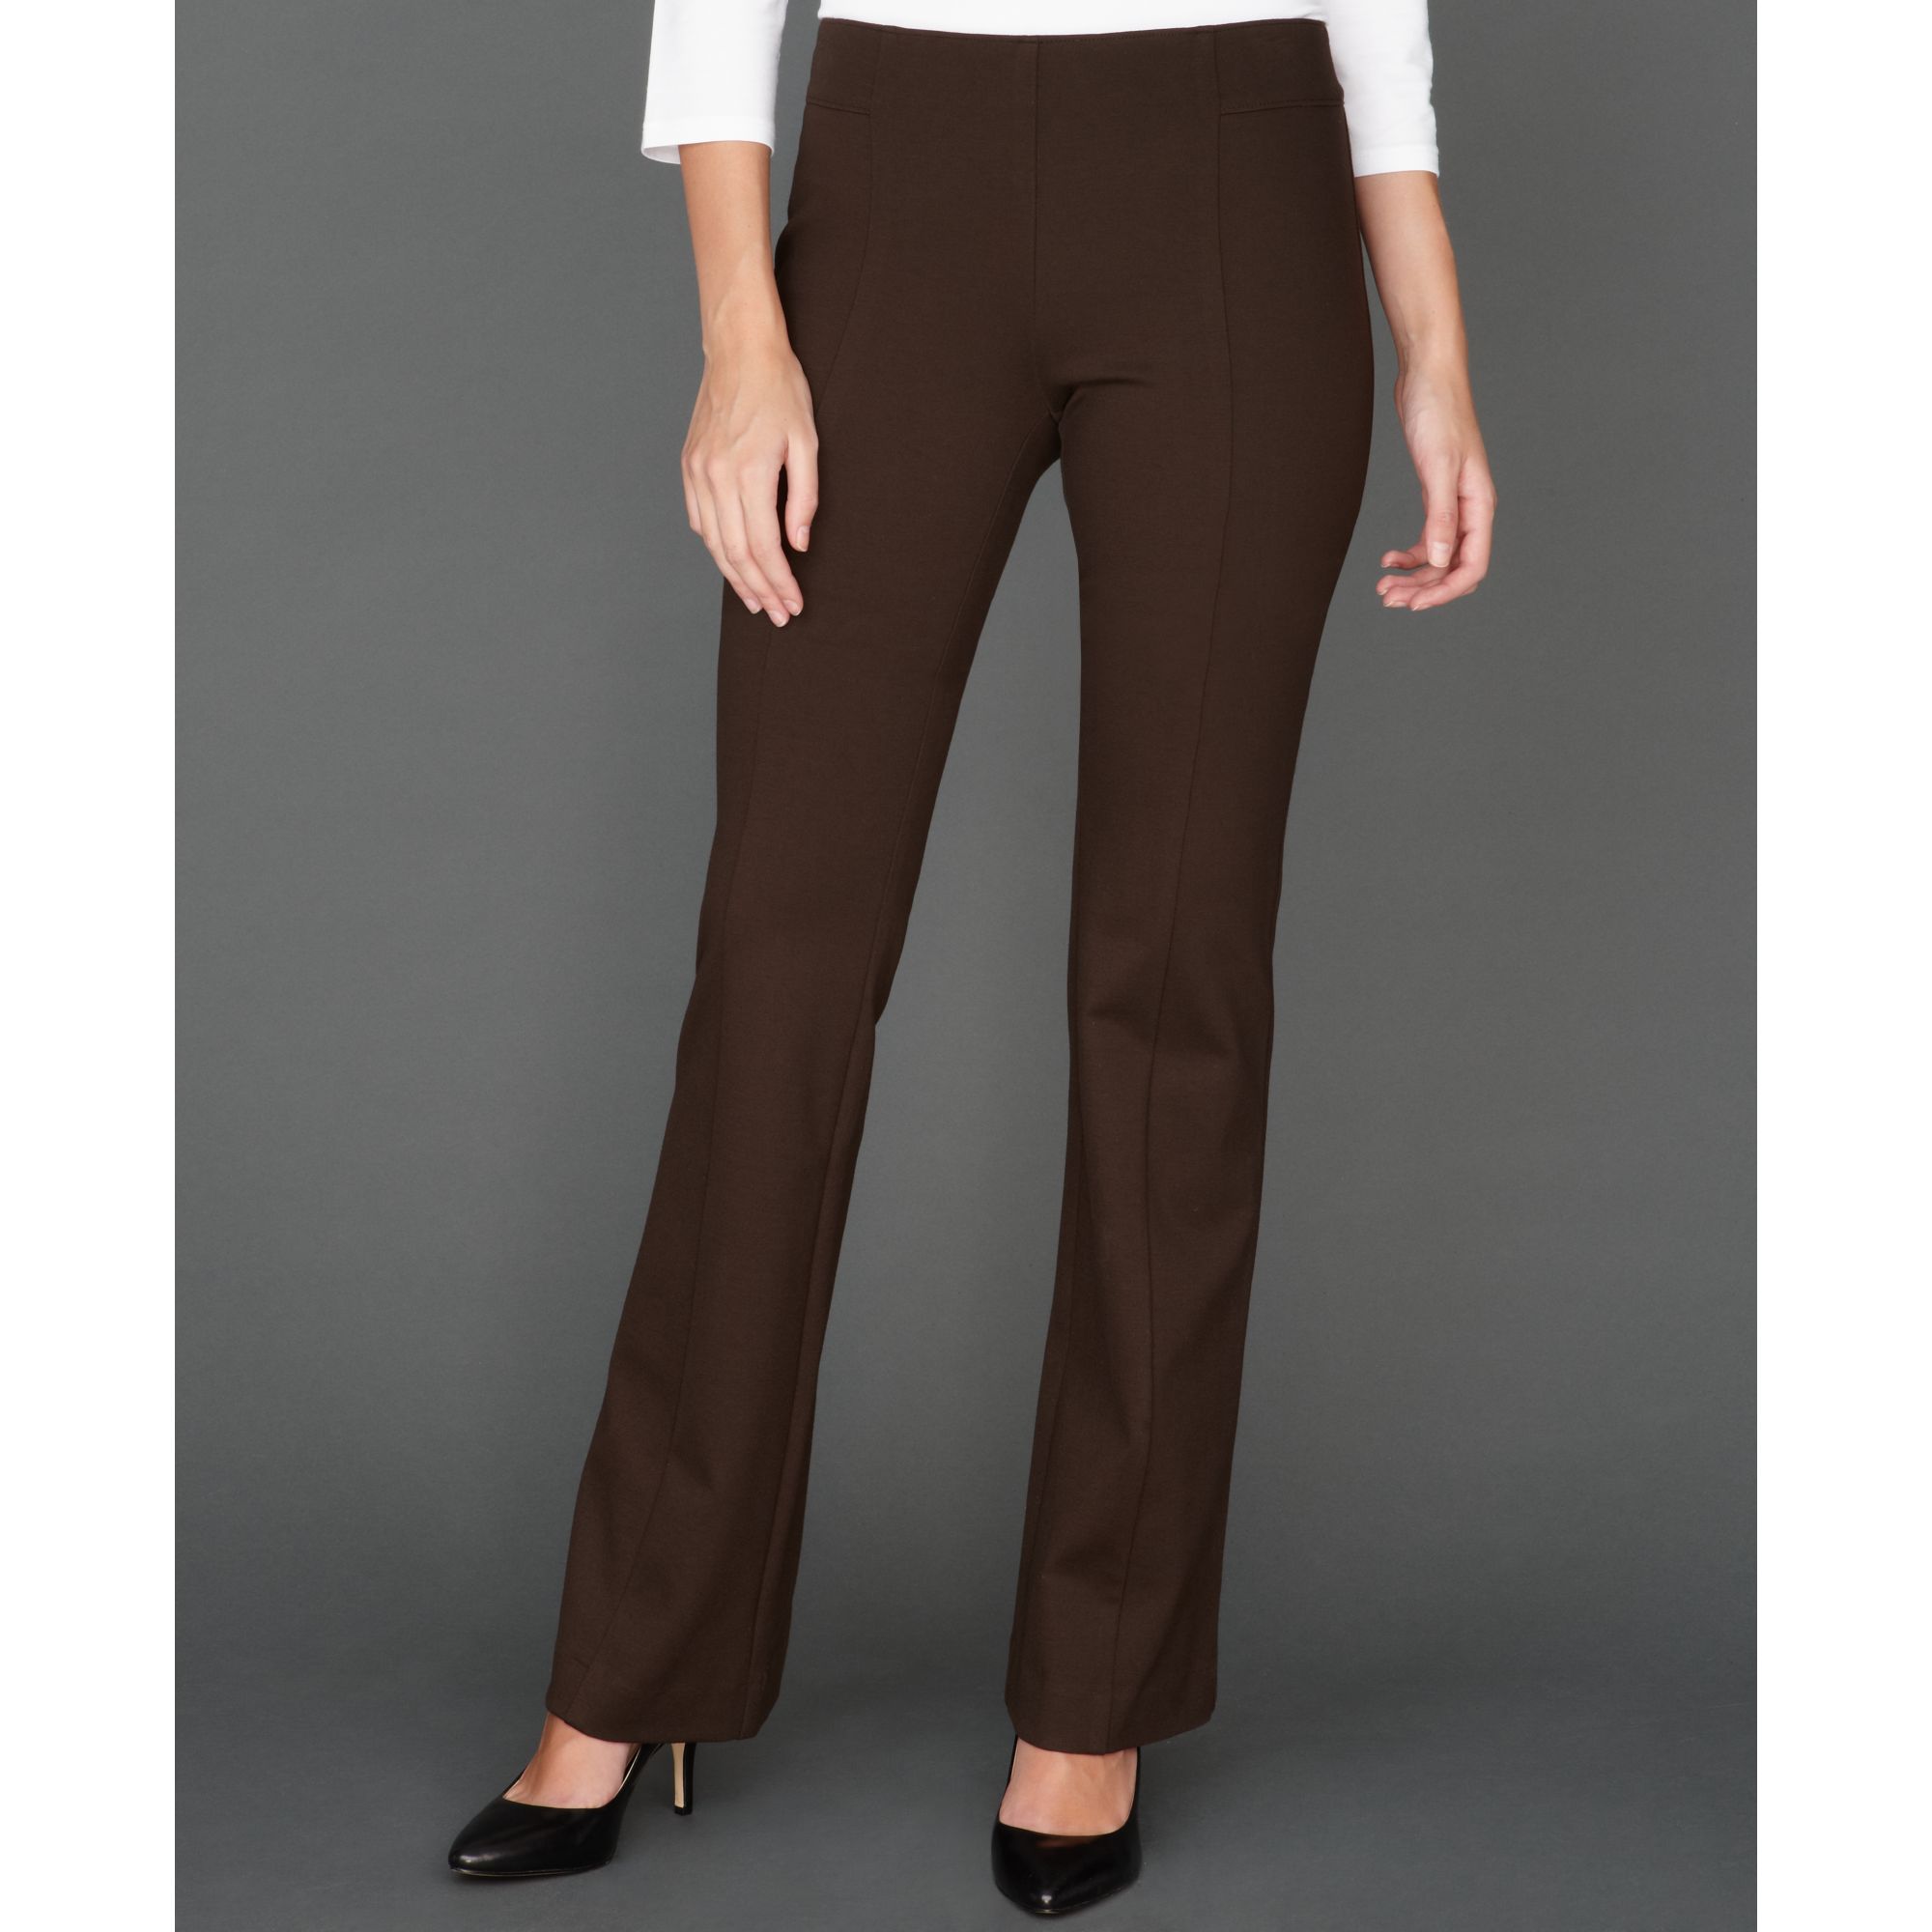 Lyst - Inc international concepts Bootcut Pullon Ponte Knit Pants in Brown